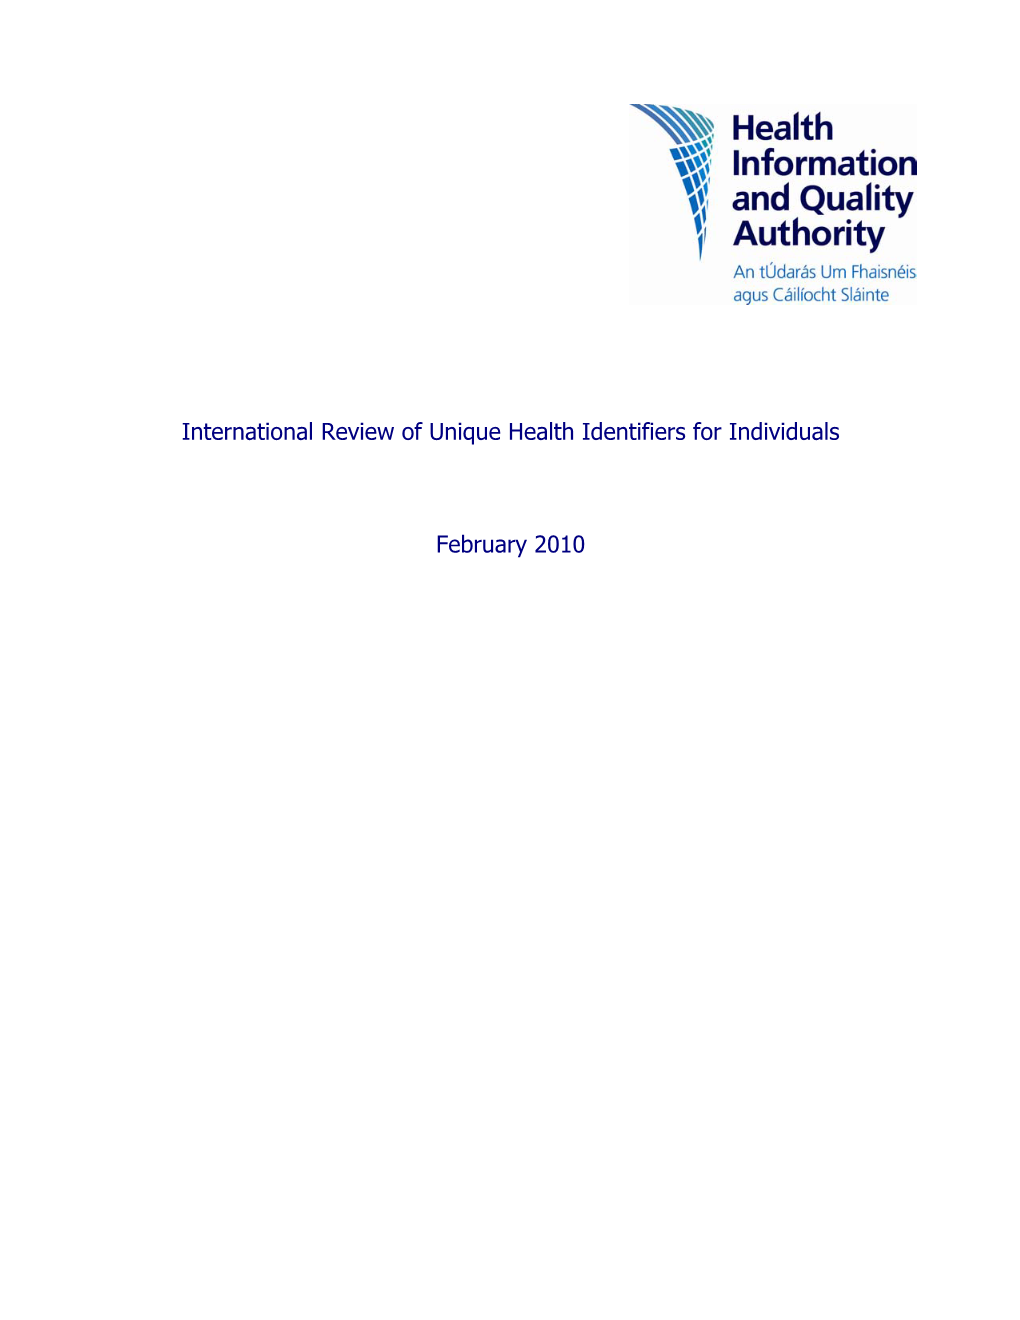 International Review of Unique Health Identifiers for Individuals